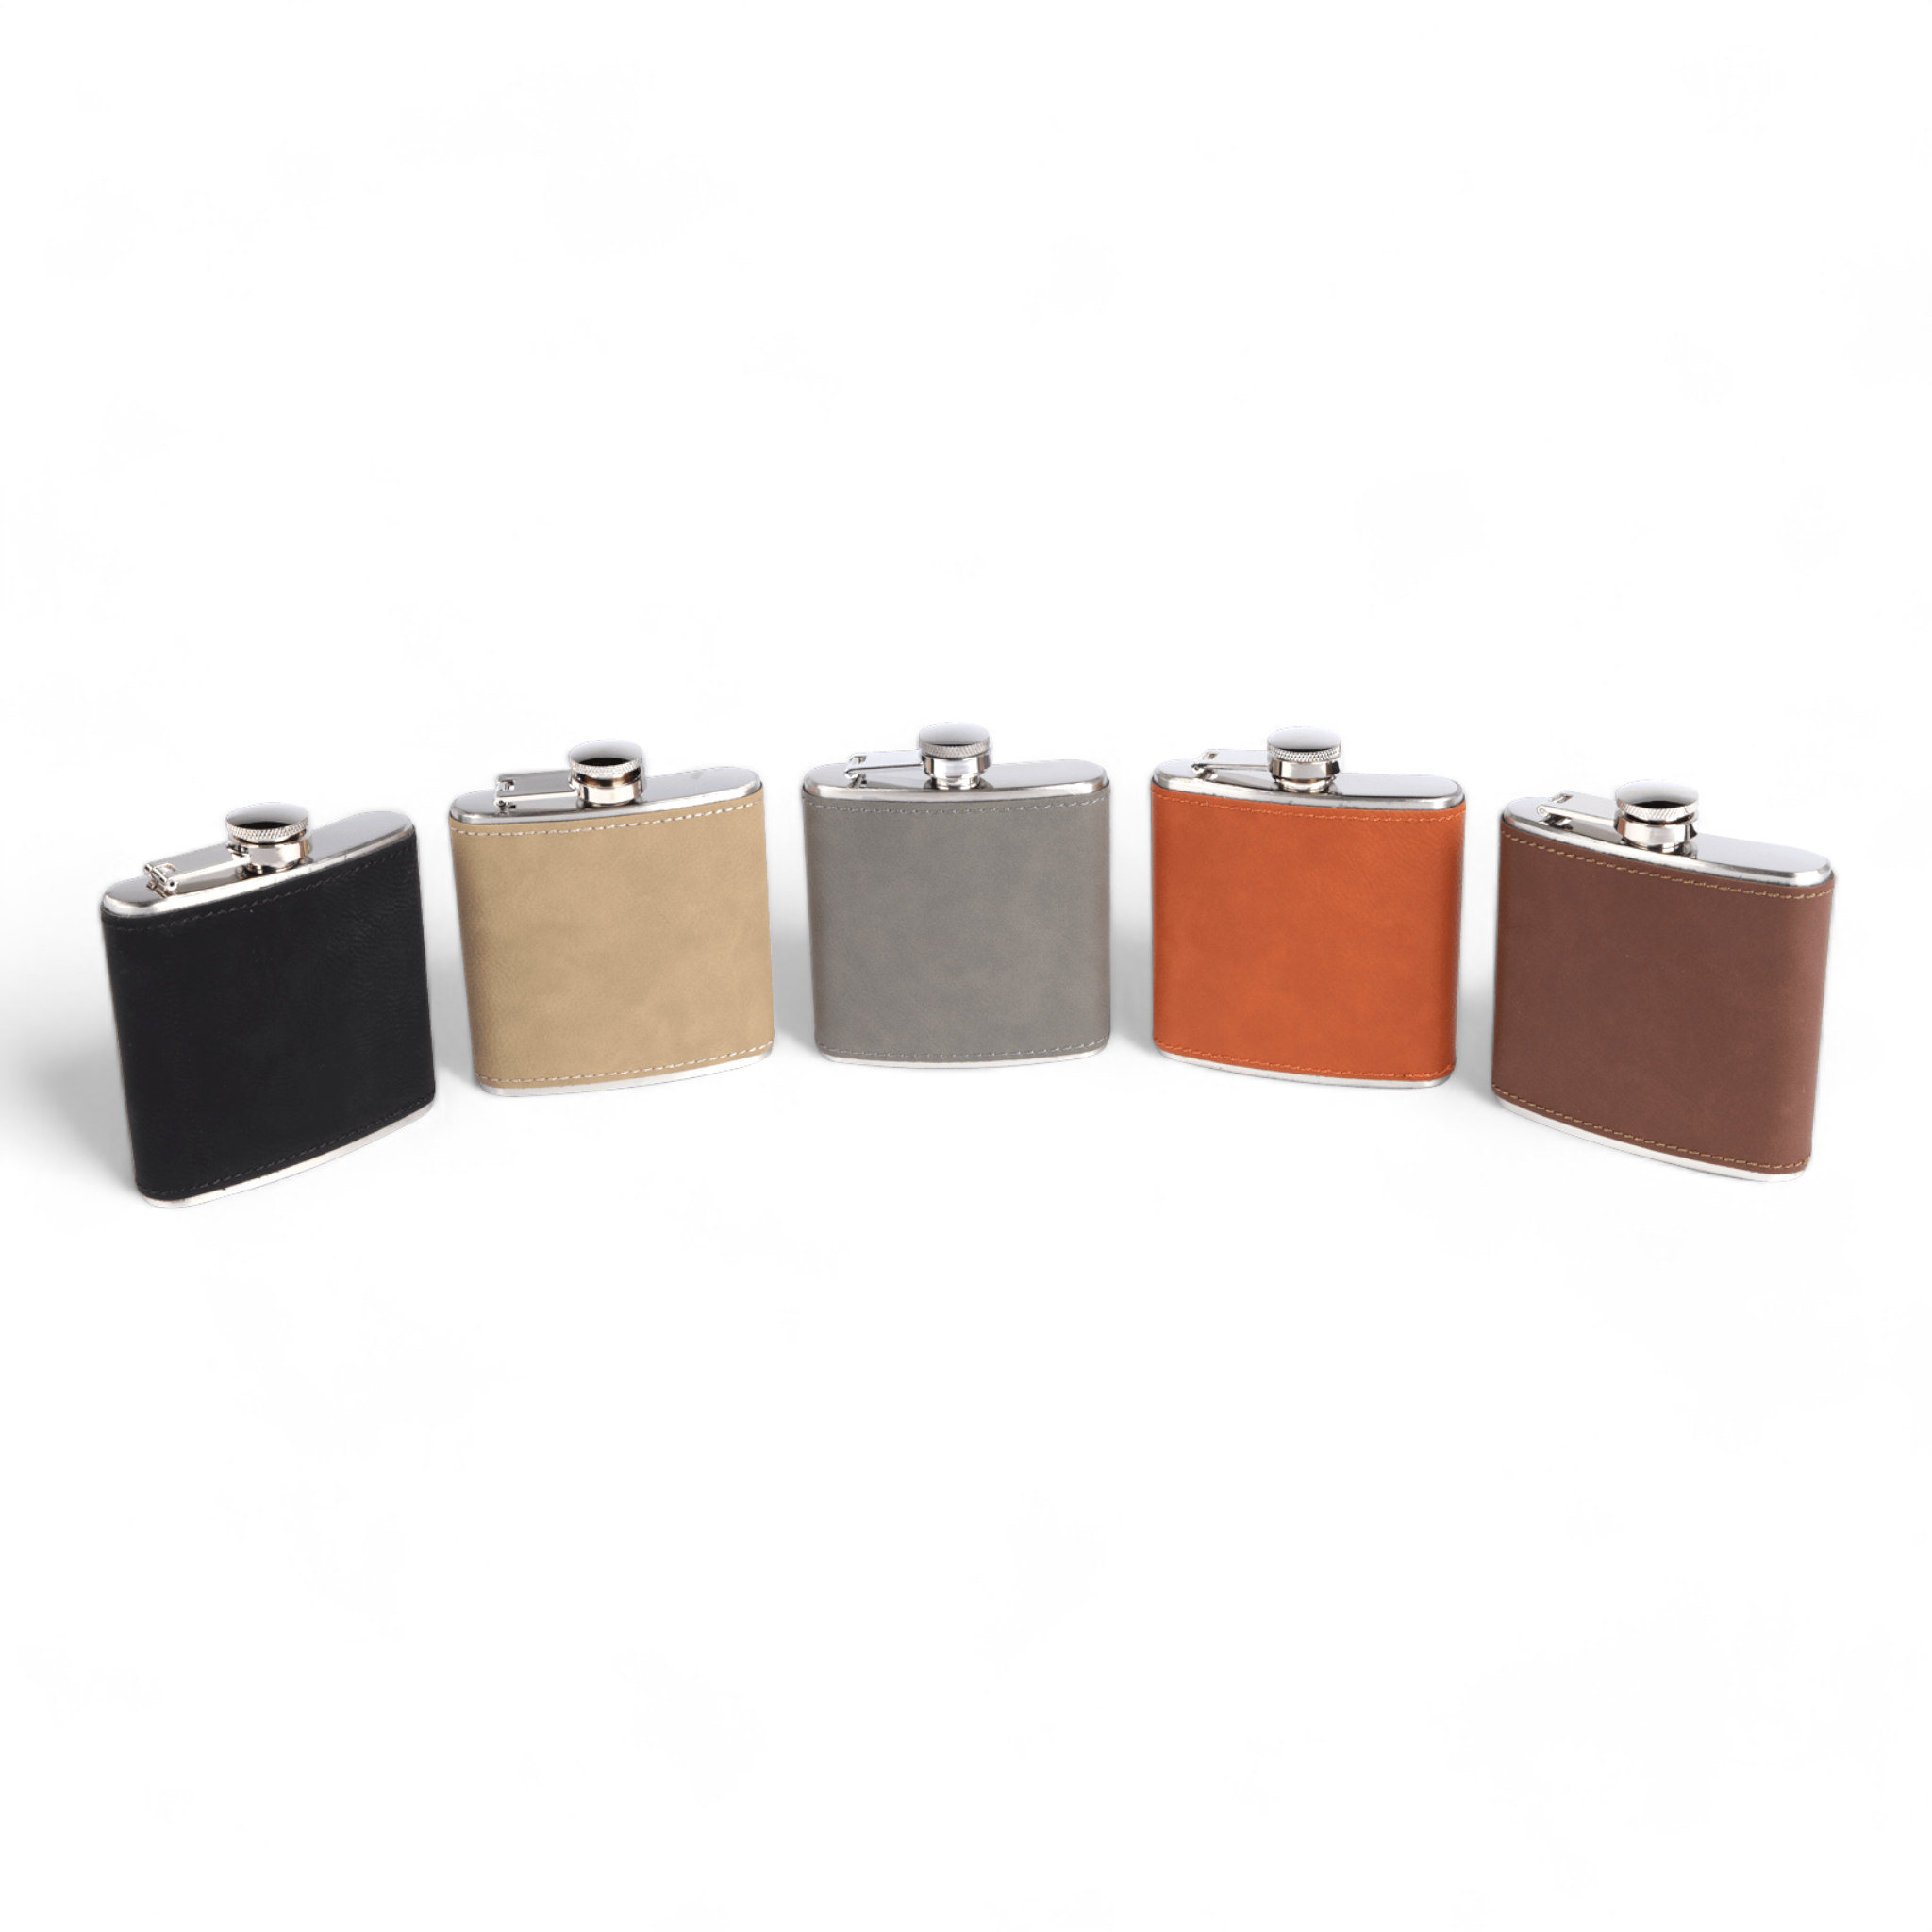 * Leather Hip Flask